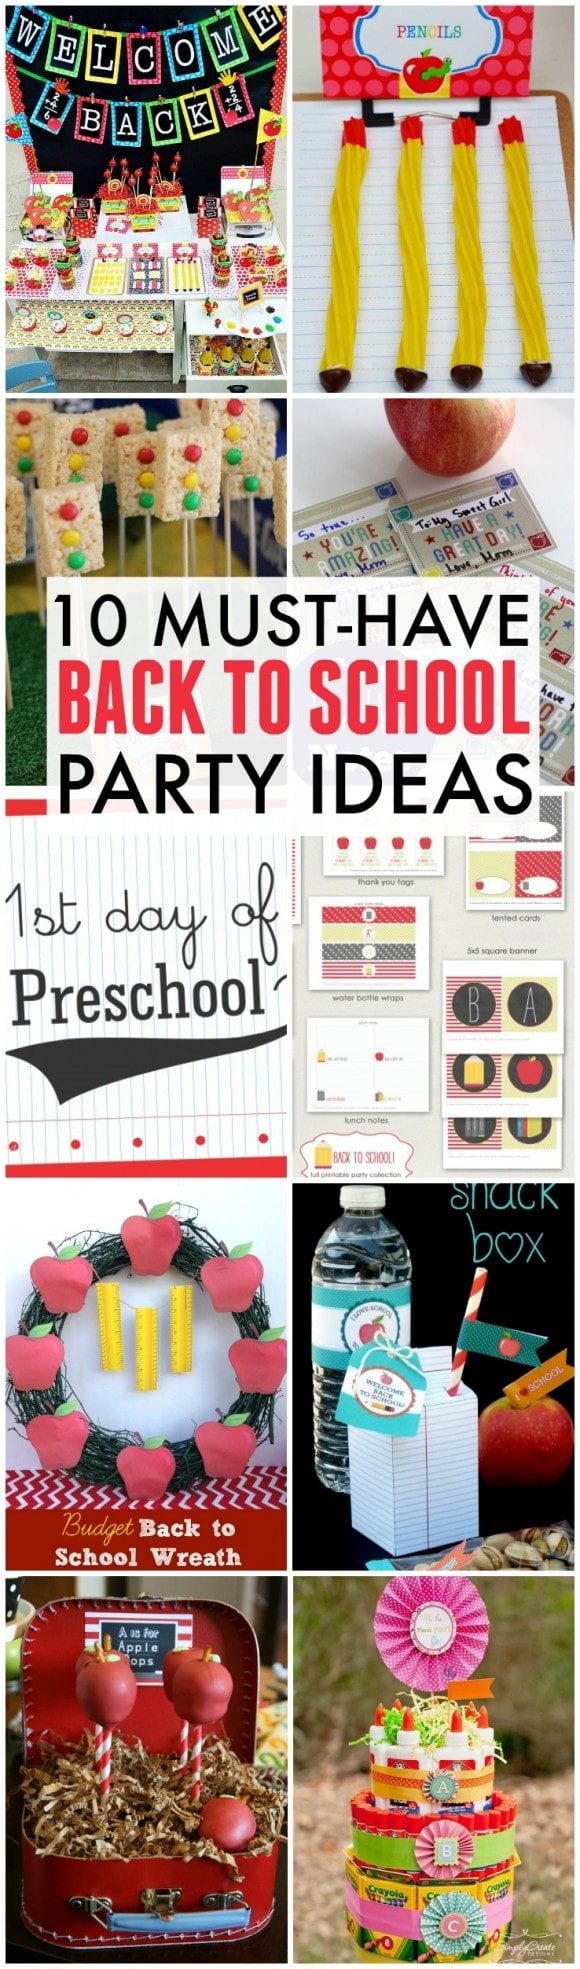 10 Must-Have Back To School Party Ideas | CatchMyParty.com